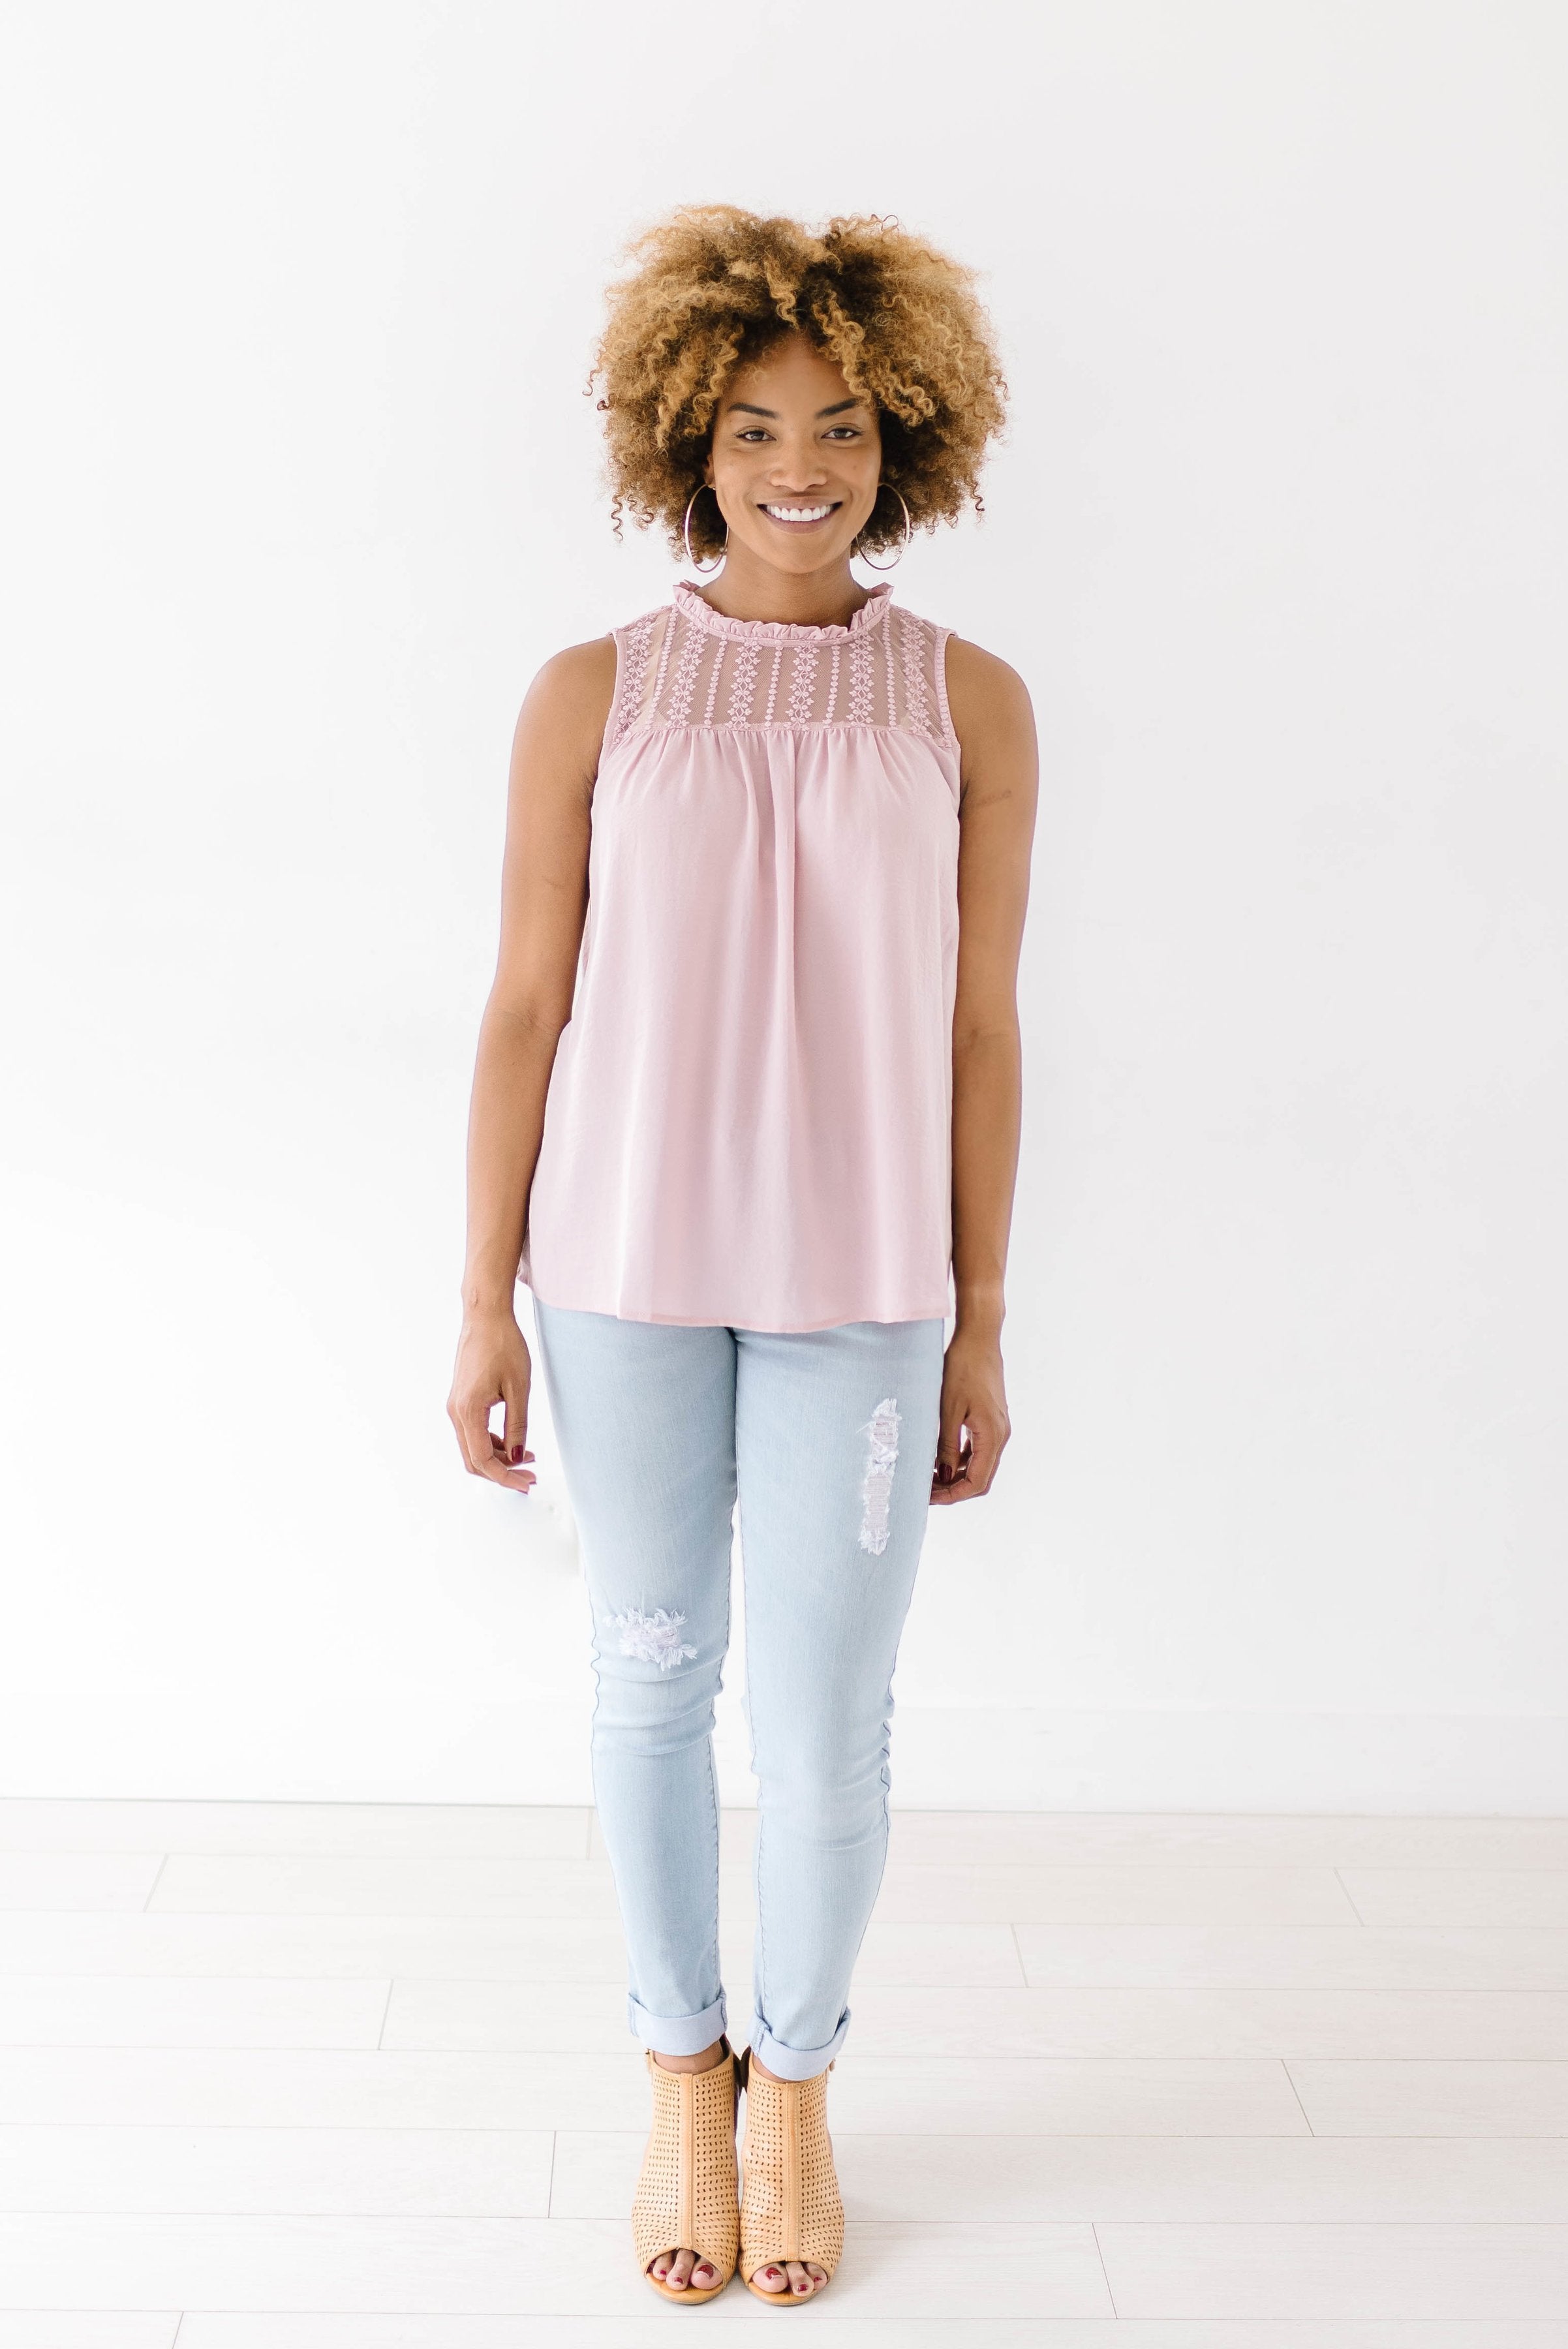 Lexie Lace Top in Blush